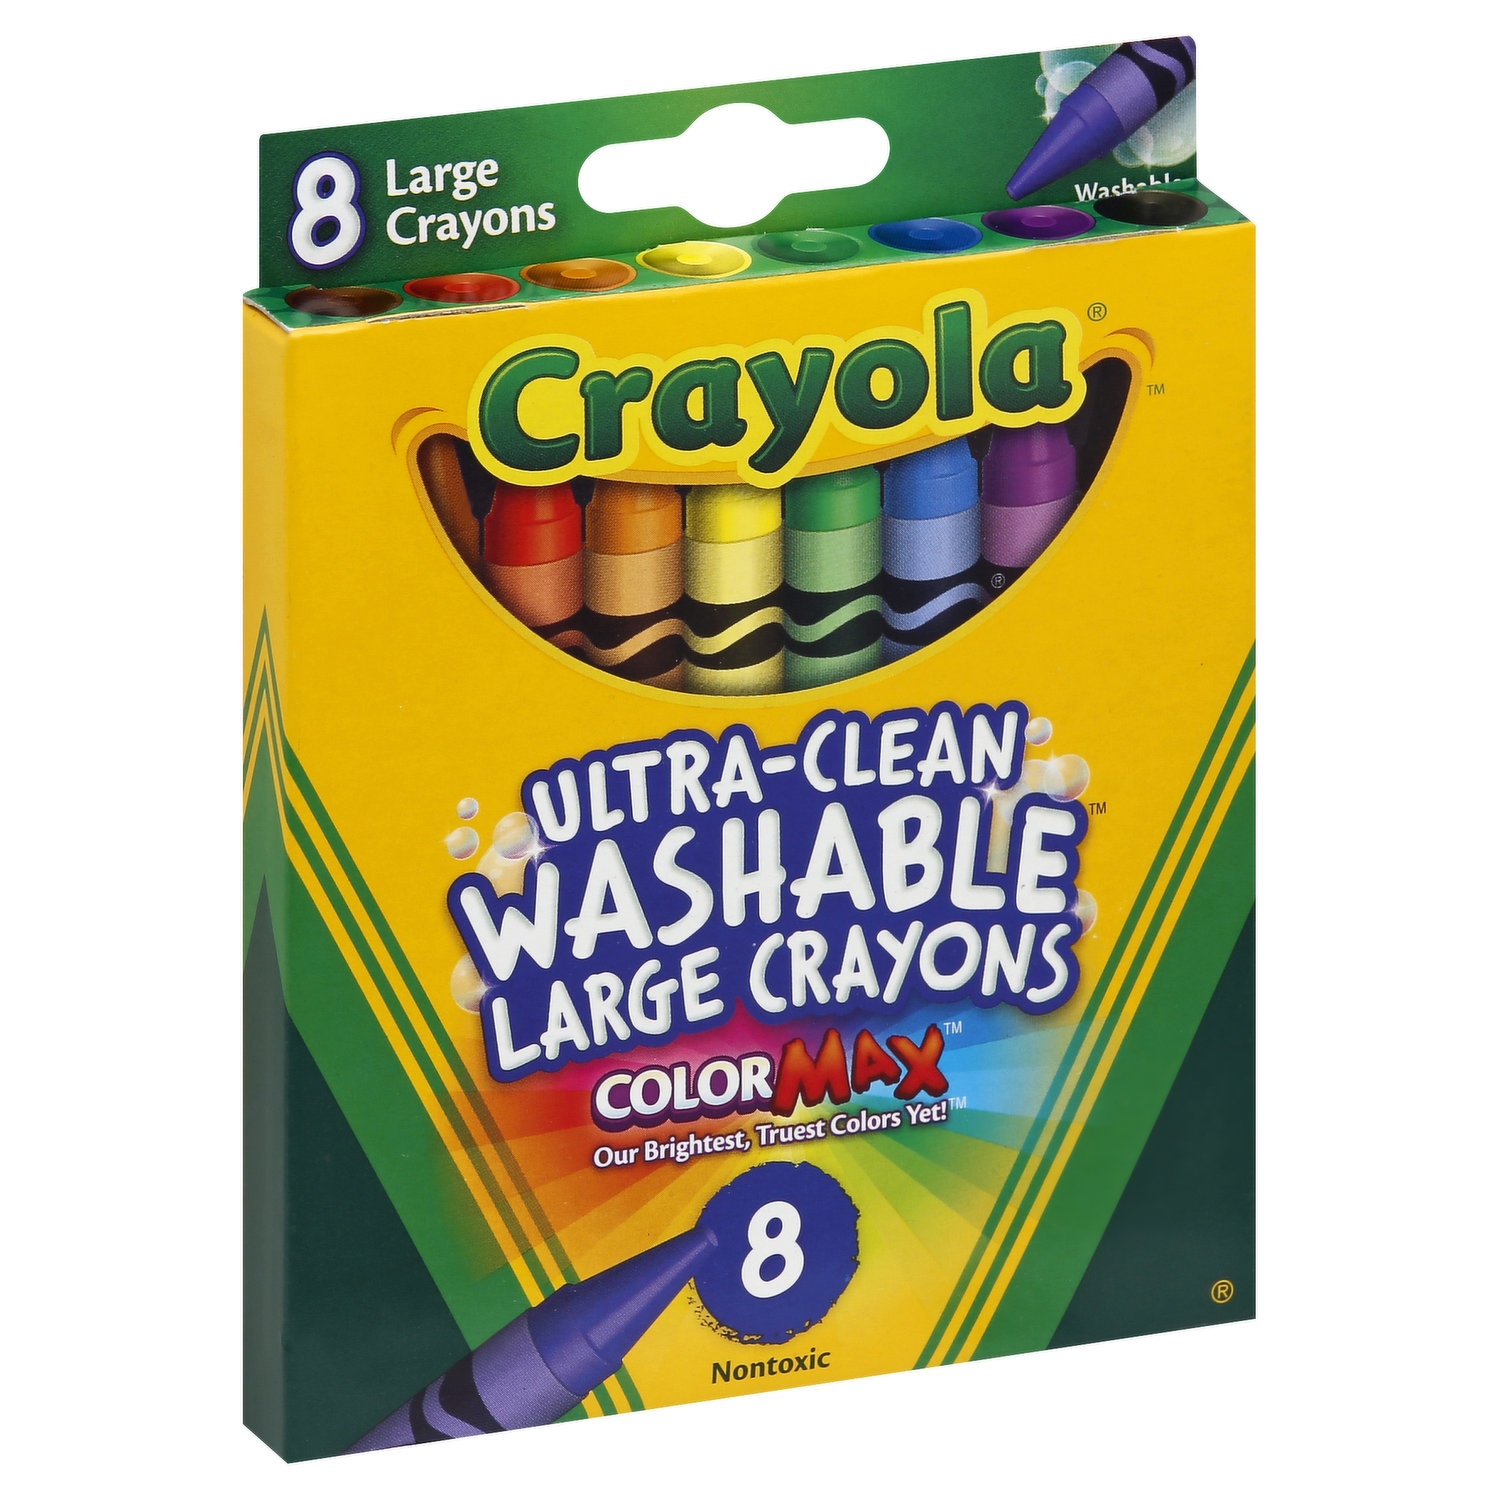 Crayola 24 Count Ultra-Clean Washable Markers ColorMAX Broadline. New In  Box.